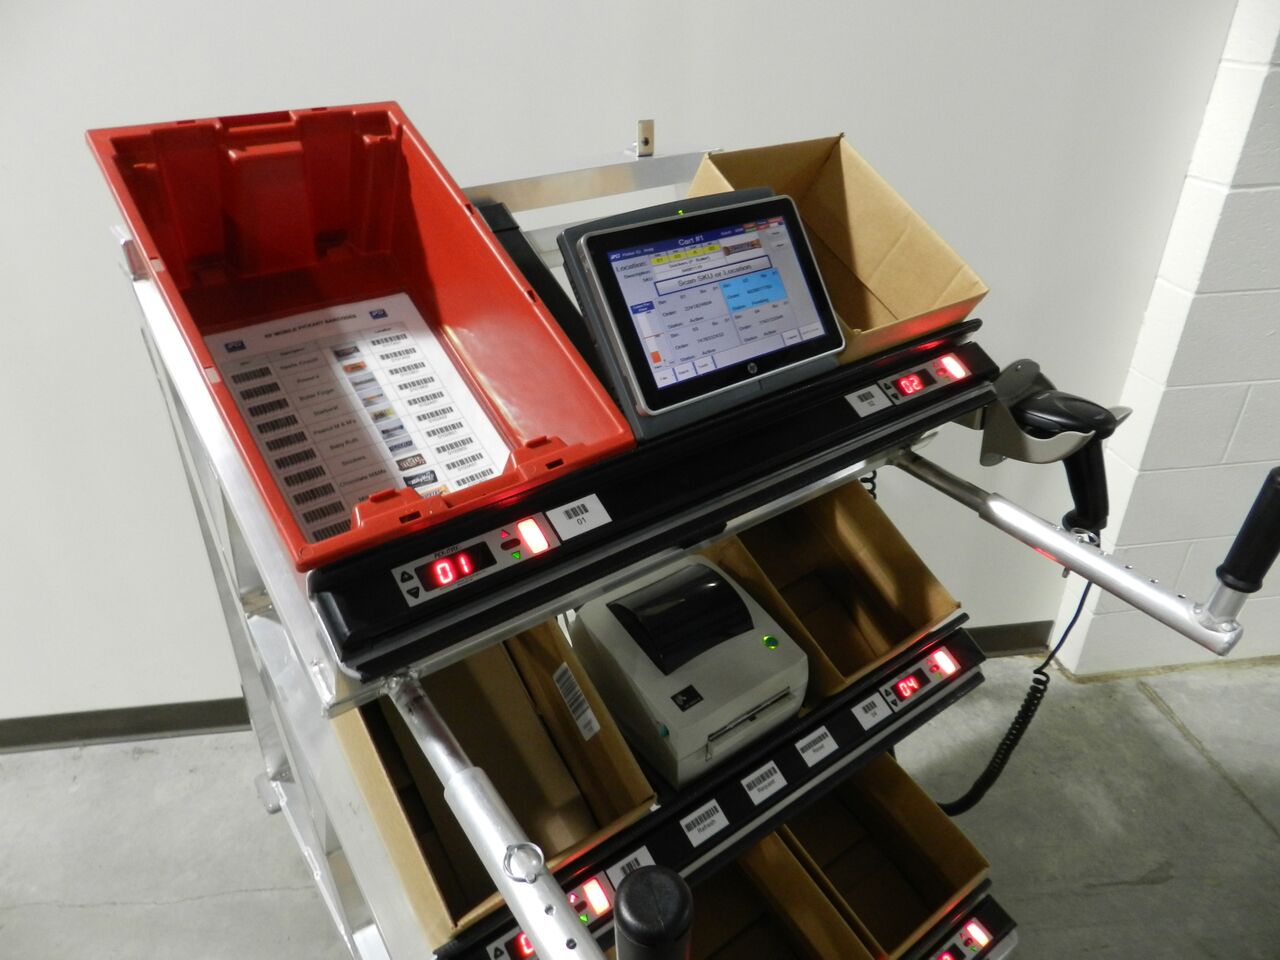 Mobile Picking Carts That Support Simultaneous Wave, Batch Picking of Multiple Orders at ProMat 2015.